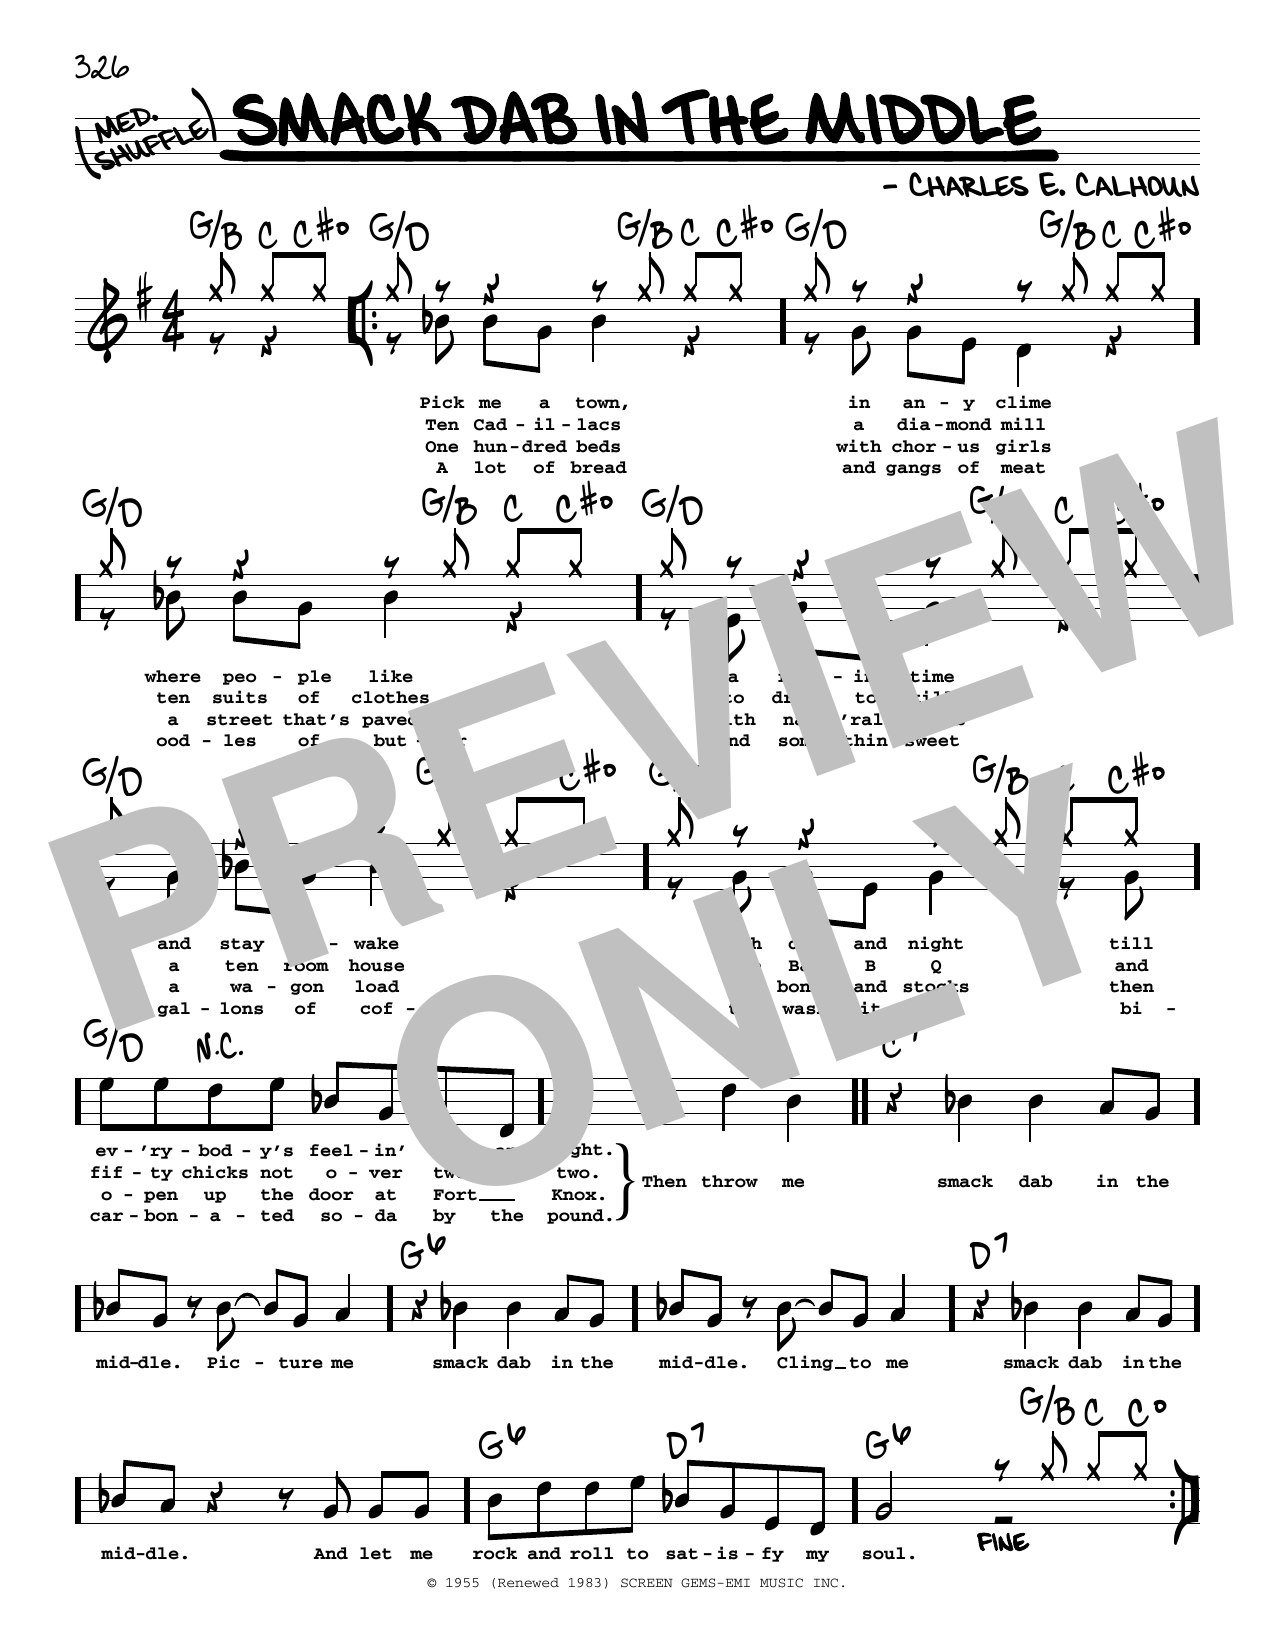 Download Charles E. Calhoun Smack Dab In The Middle (High Voice) Sheet Music